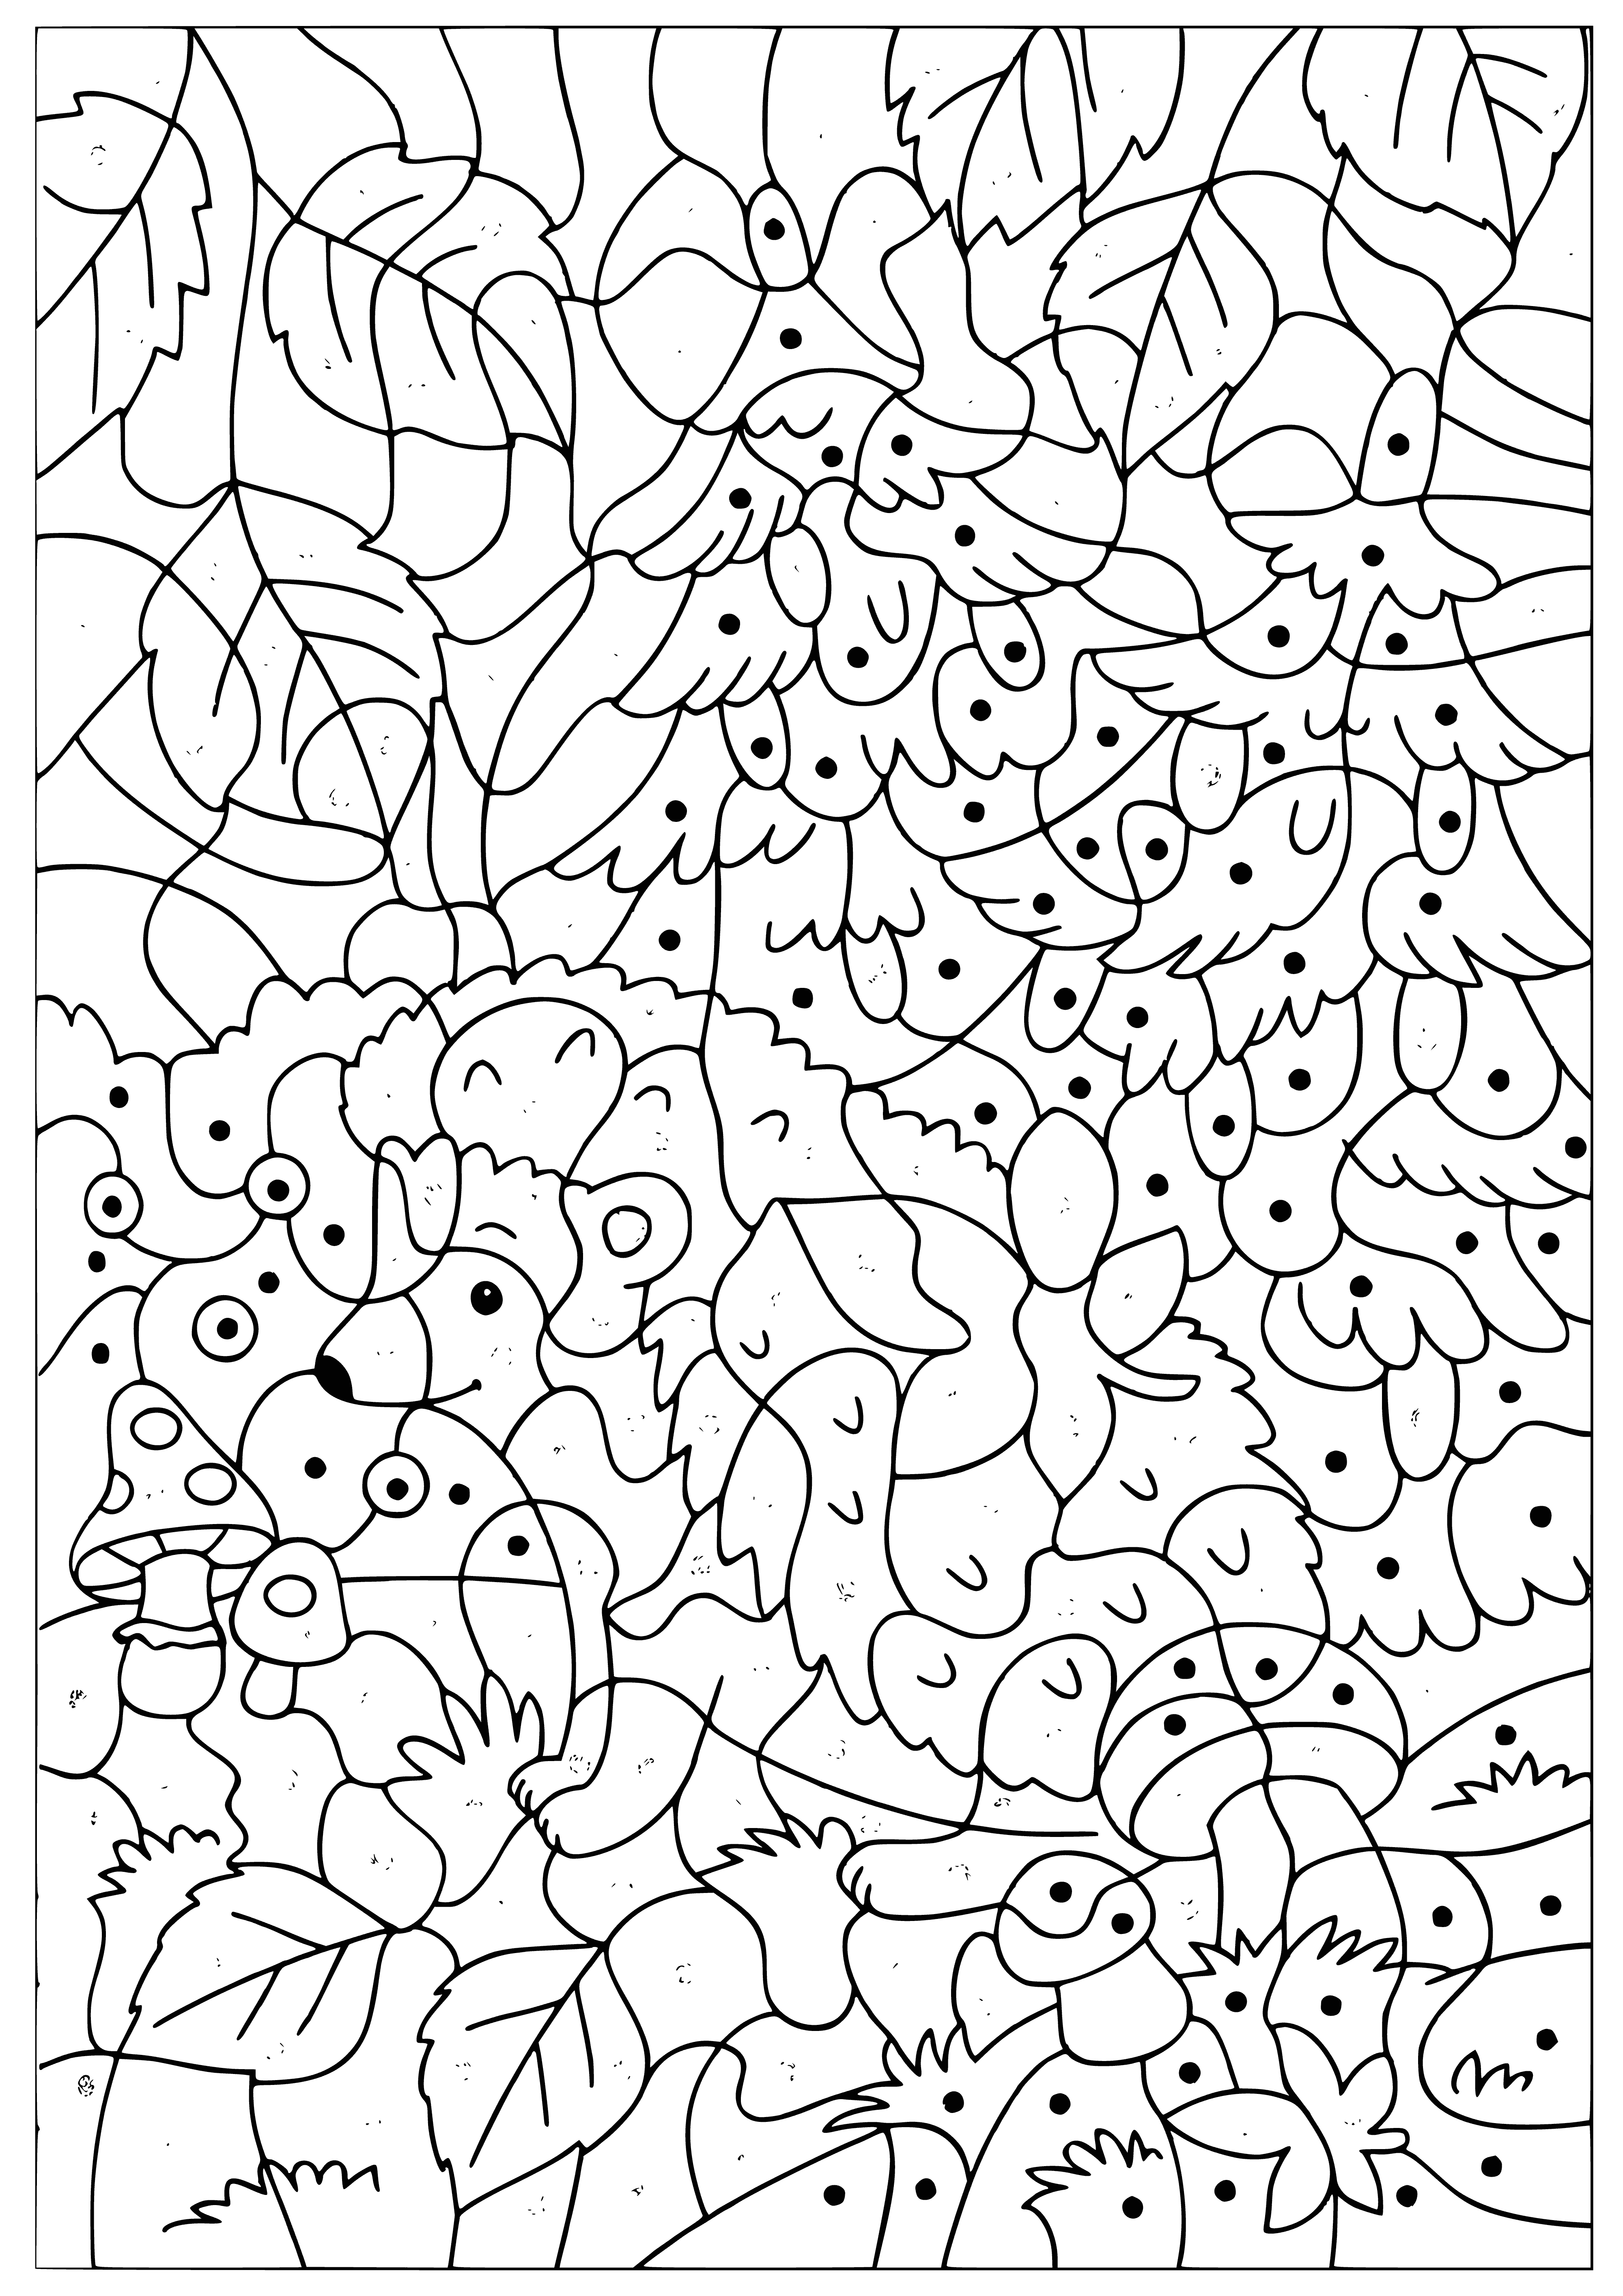 coloring page: Hedgehog stands in forest, holding magic wand, with balls of light floating around.